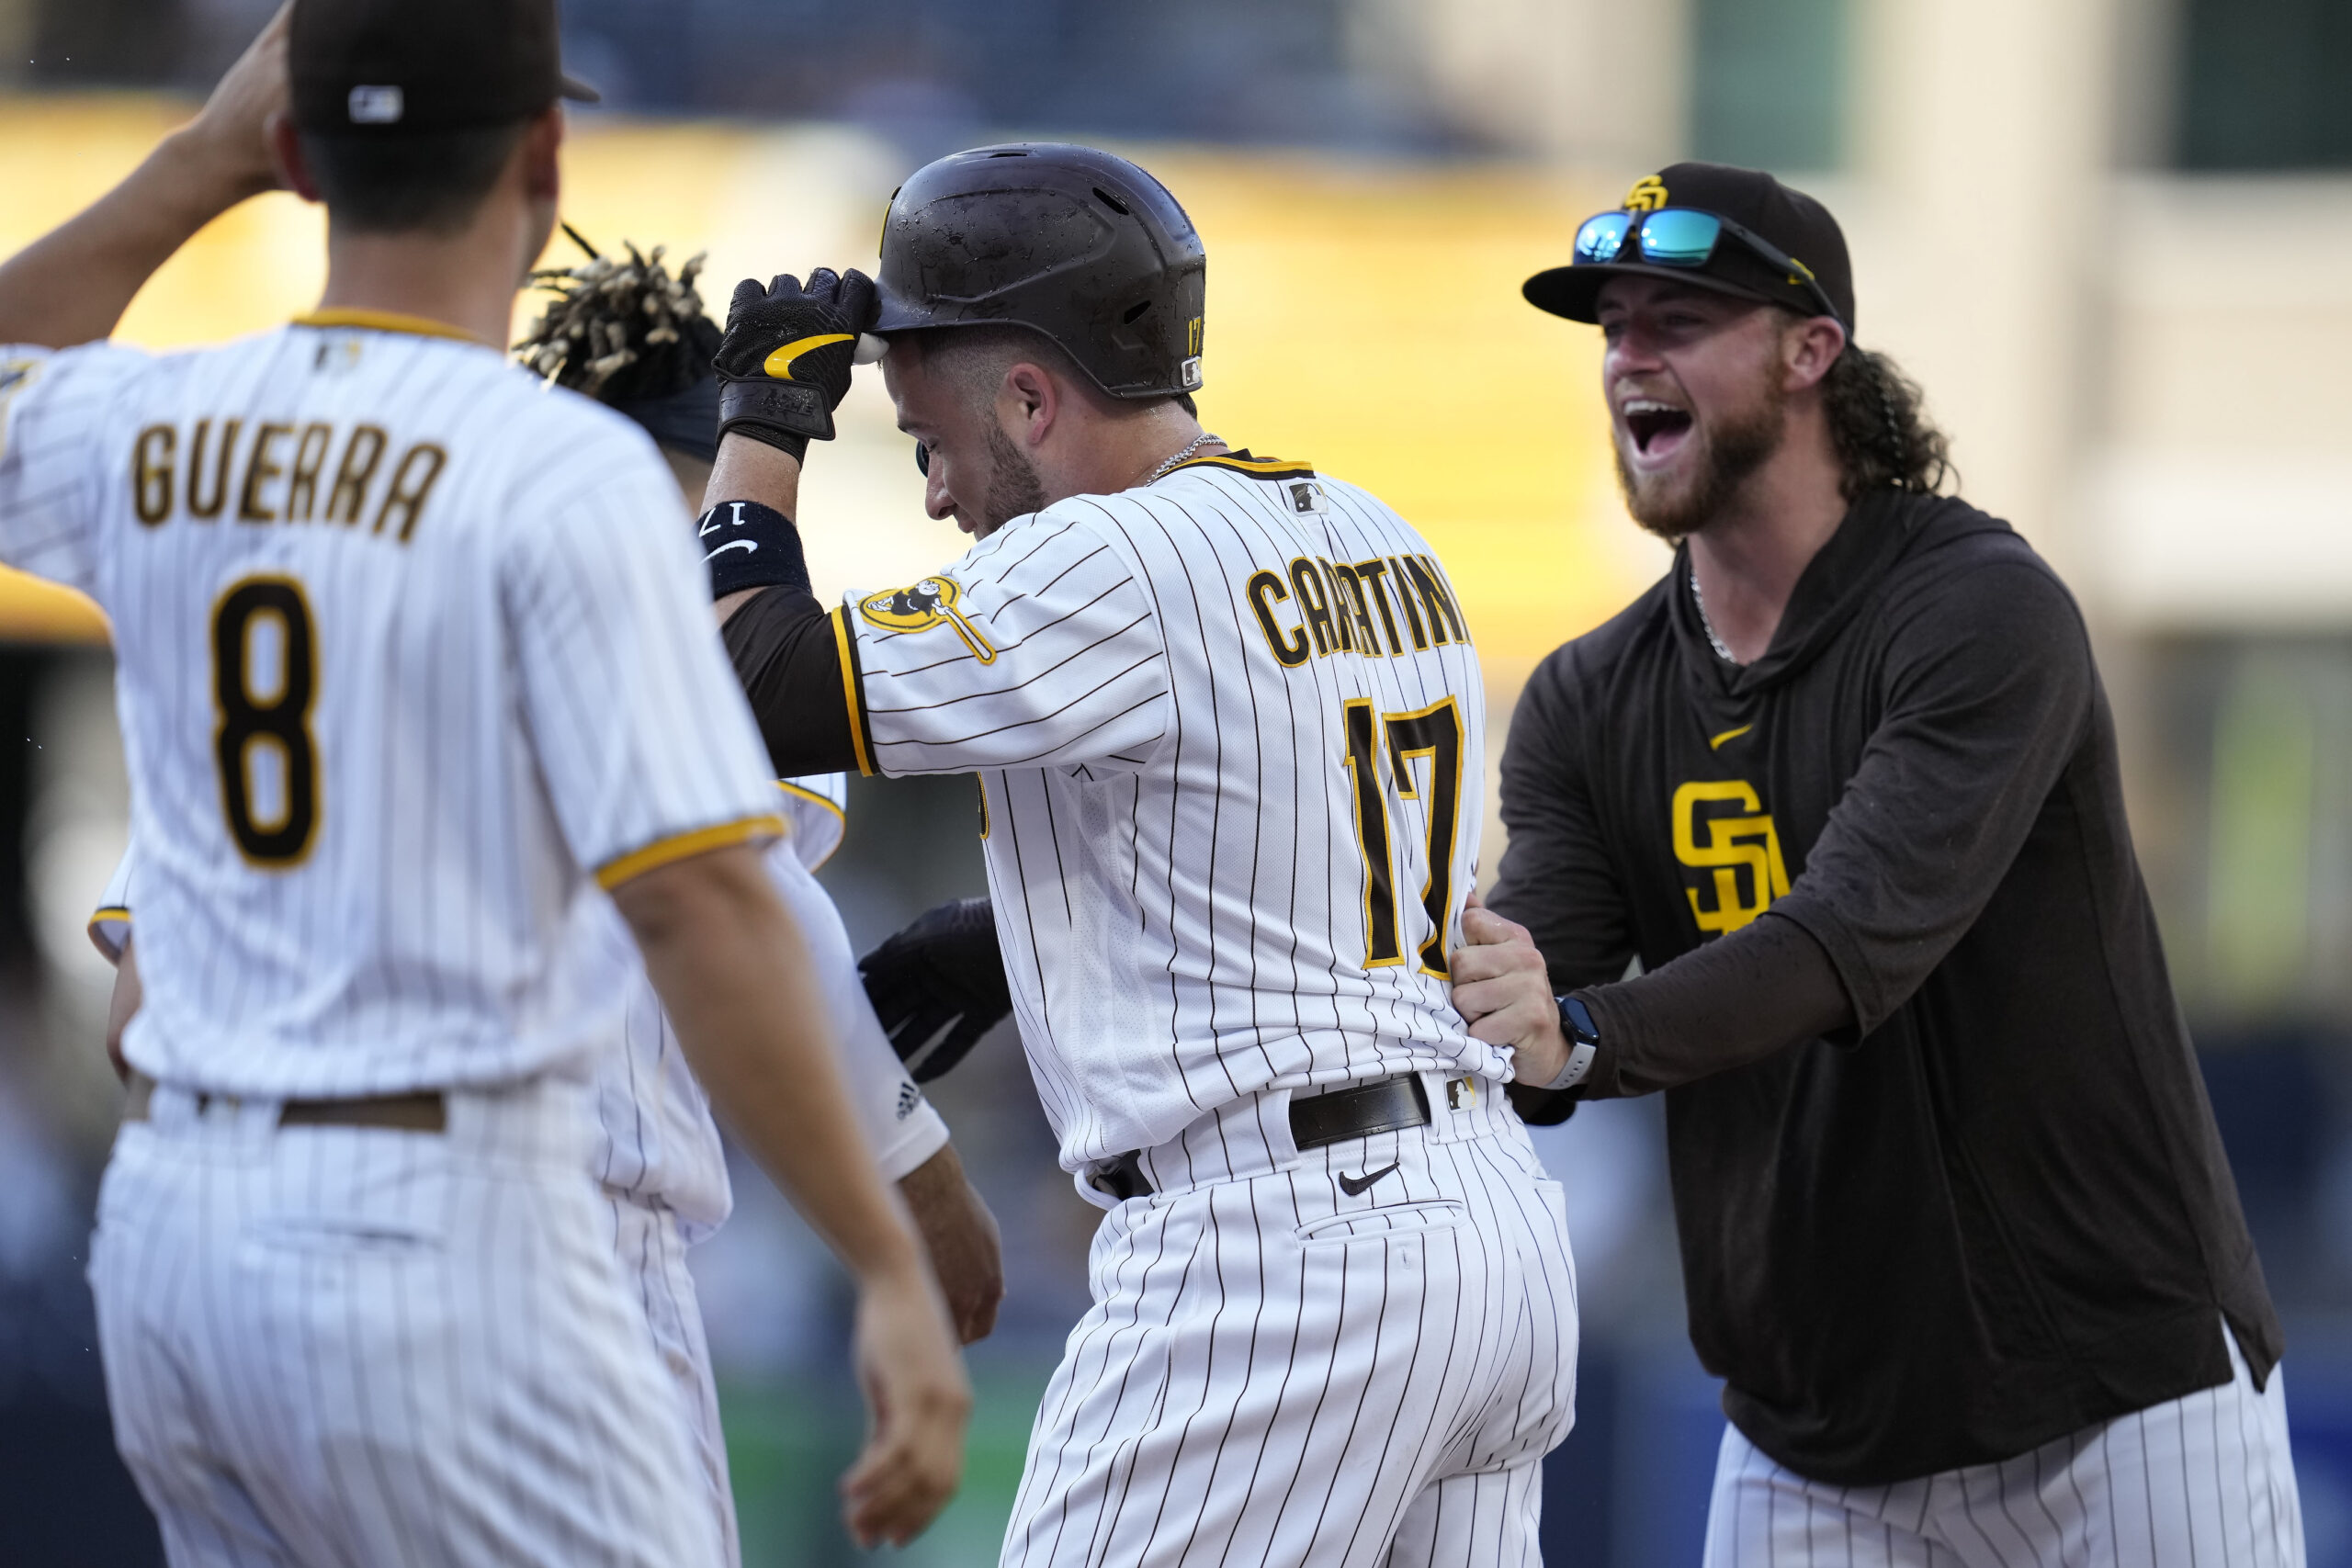 Mark Melancon gives up walk-off home run in Giants' loss